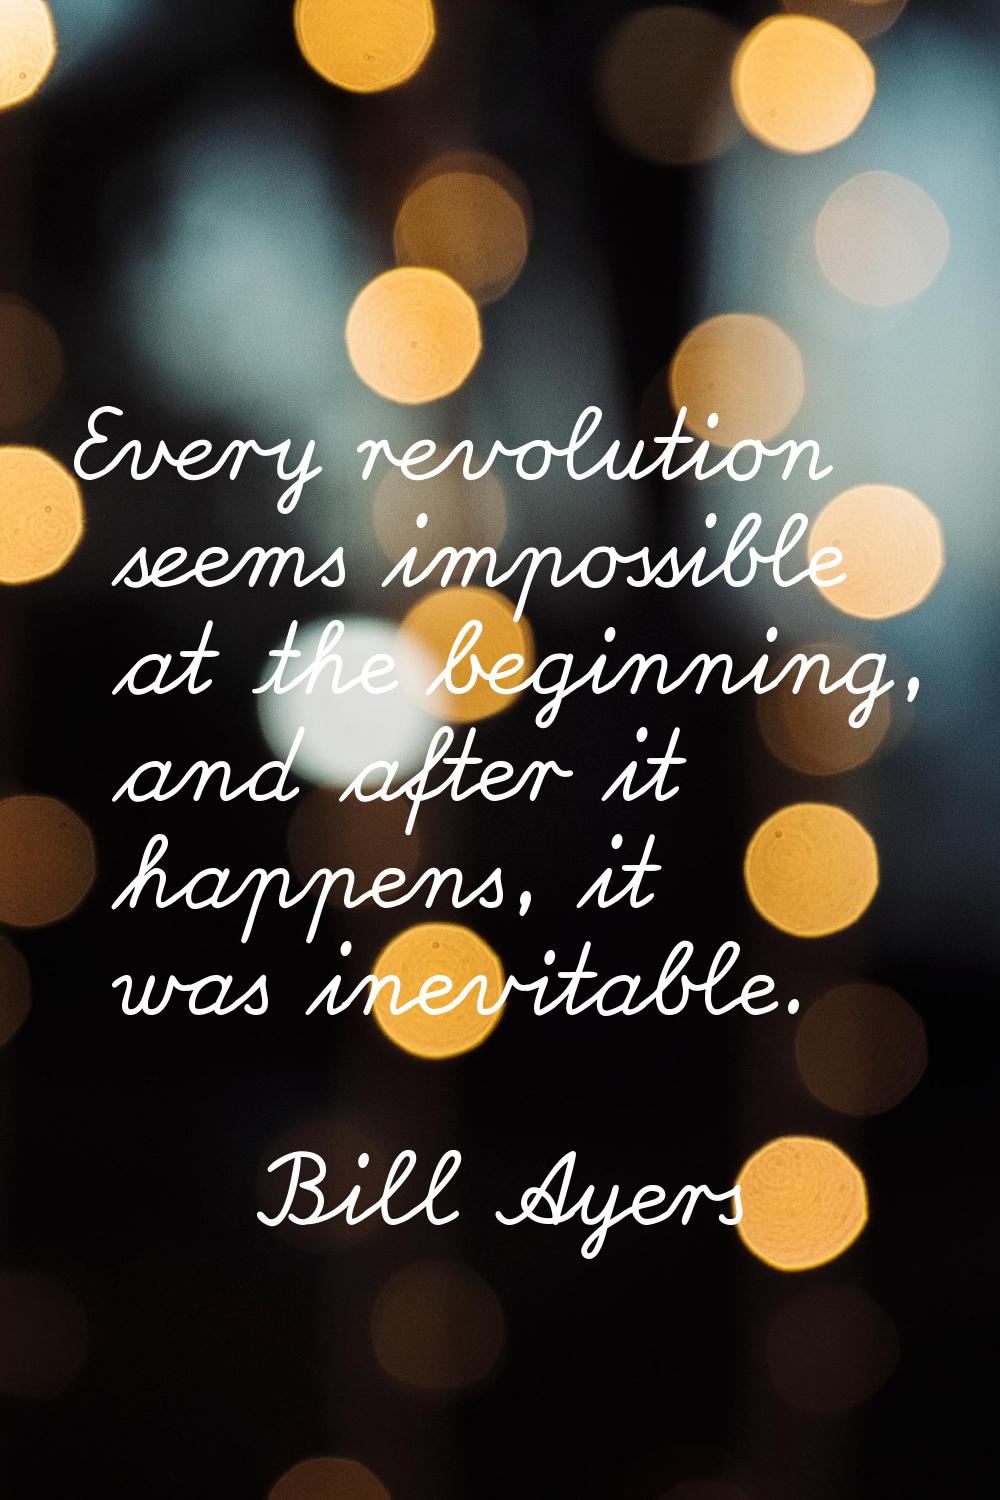 Every revolution seems impossible at the beginning, and after it happens, it was inevitable.